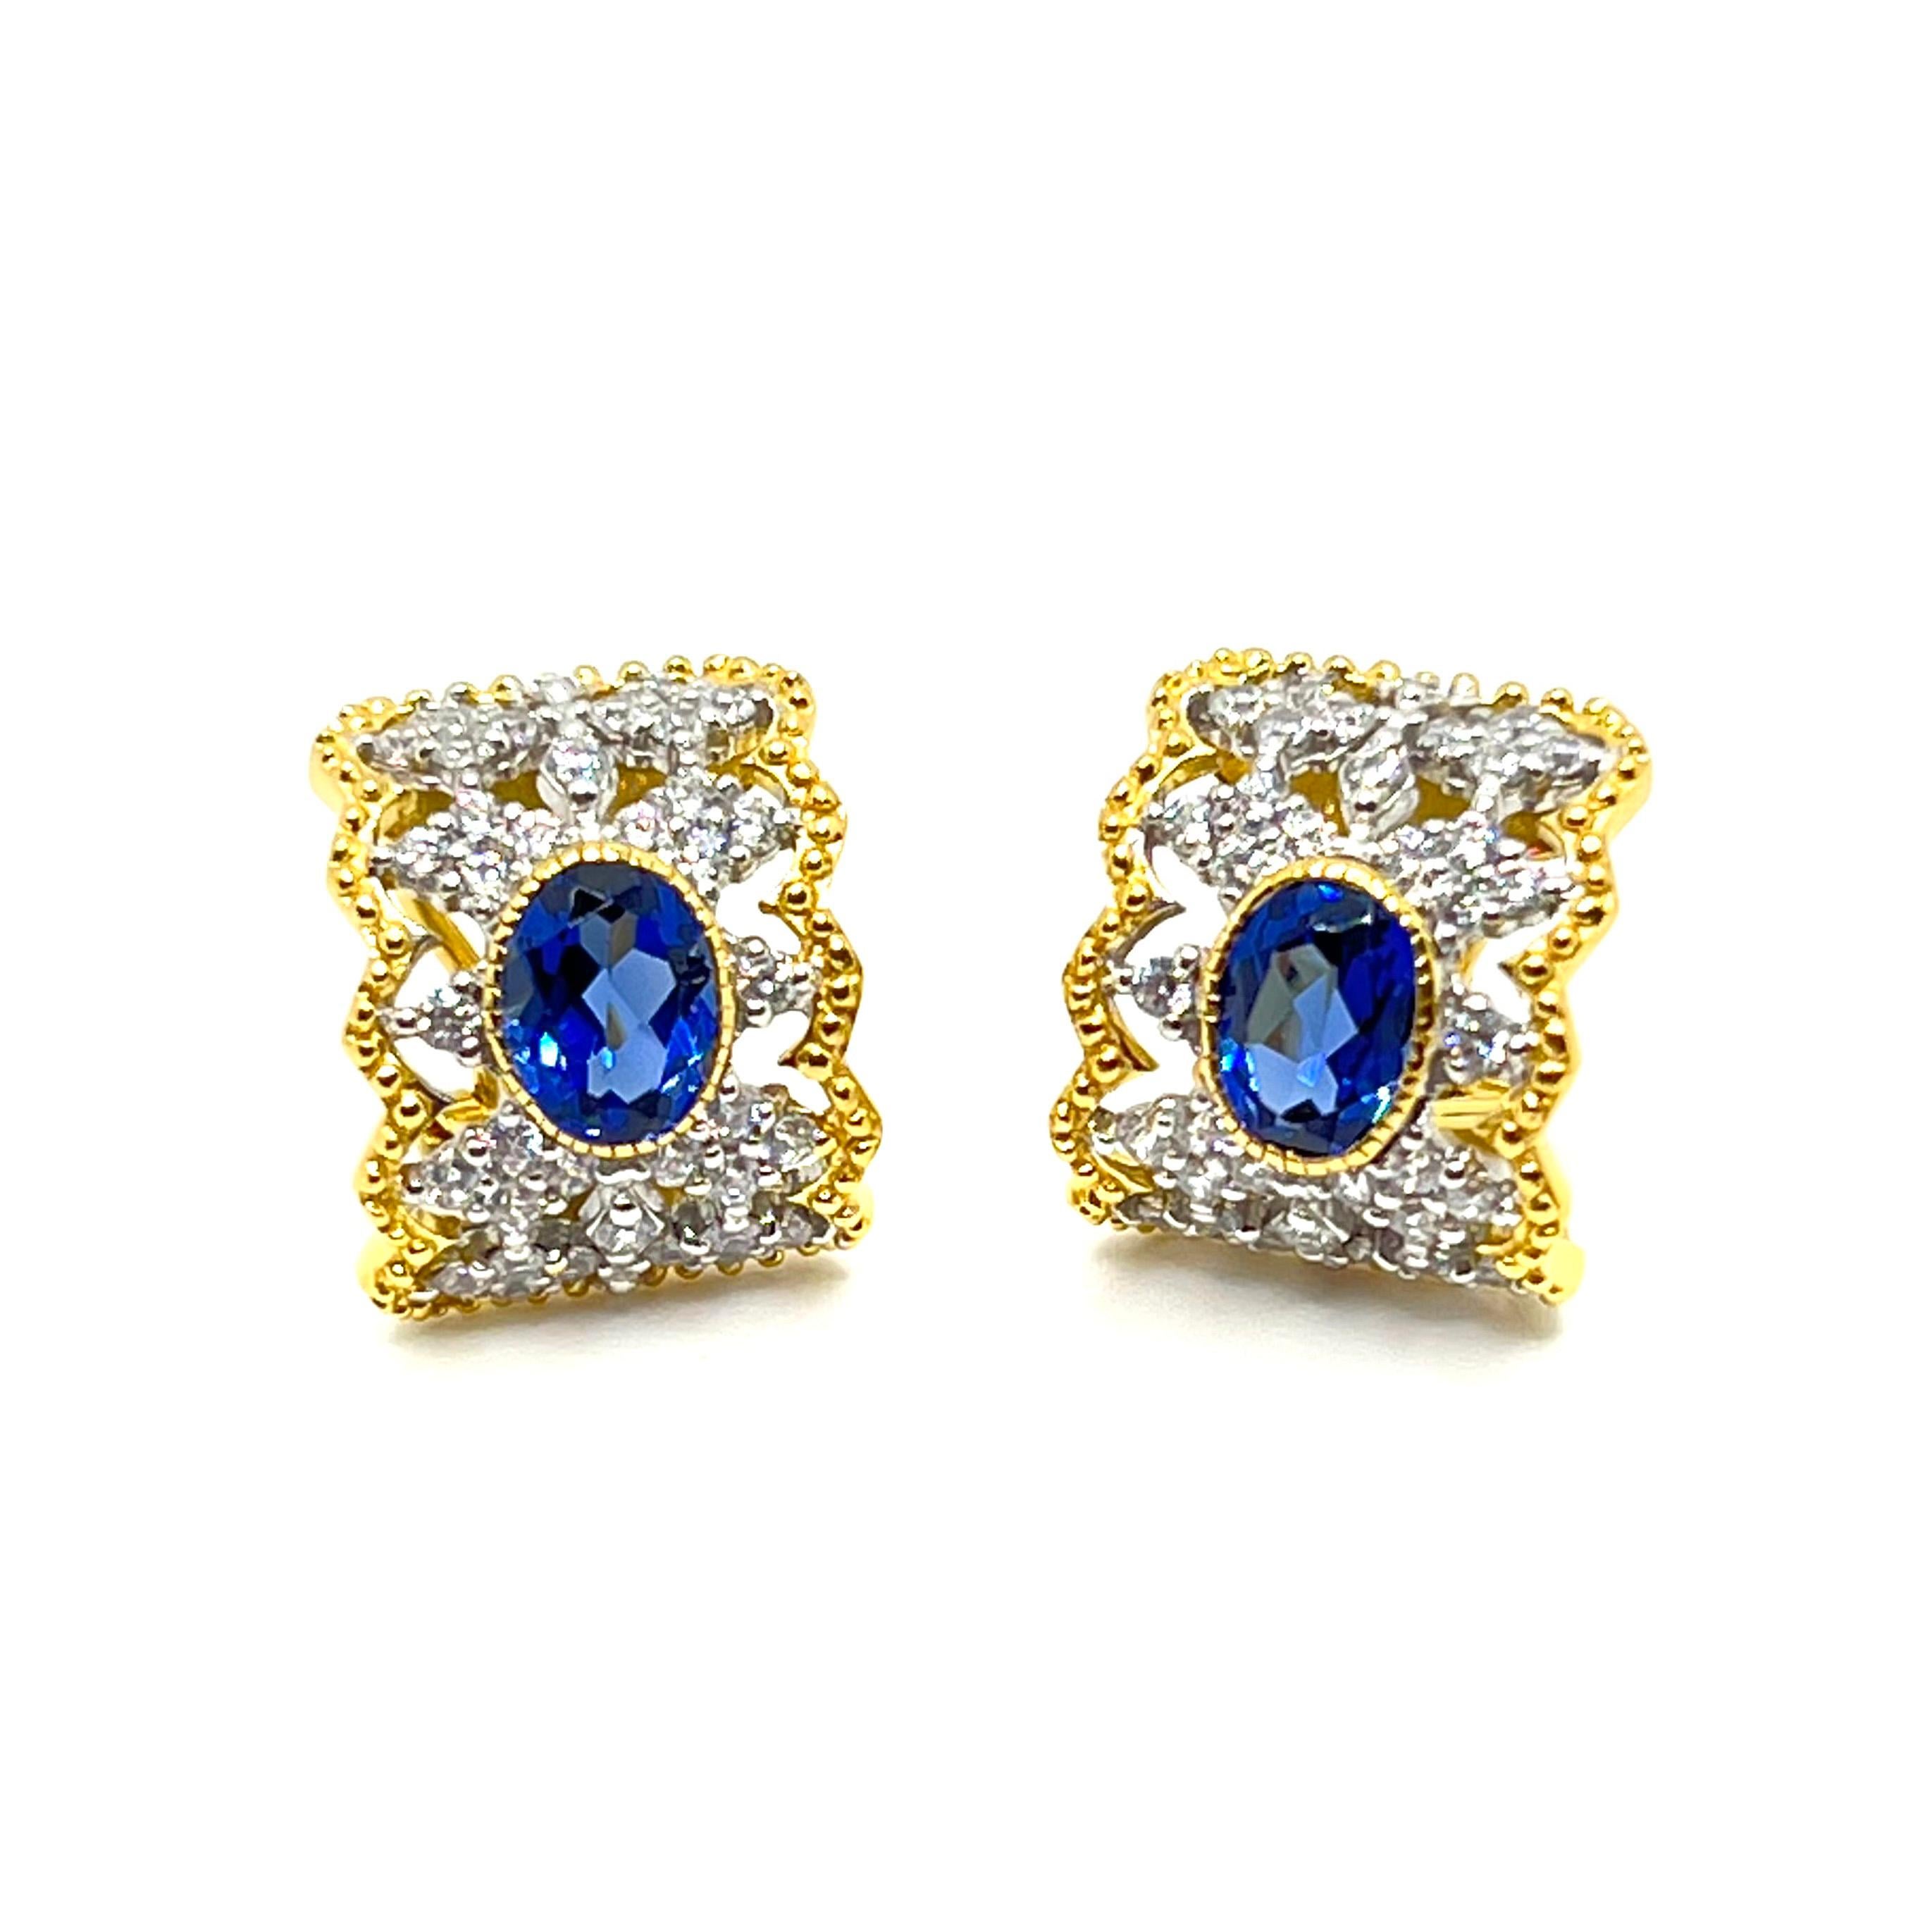 Stunning Bijoux Num Diamond-Pattern Oval Lab Sapphire Center Half Hoop Vermeil Earrings

These fabulous earrings feature a pair of beautiful oval lab-created blue sapphire (1.25ct size) and 76pcs of round simulated diamonds handset in two-tone